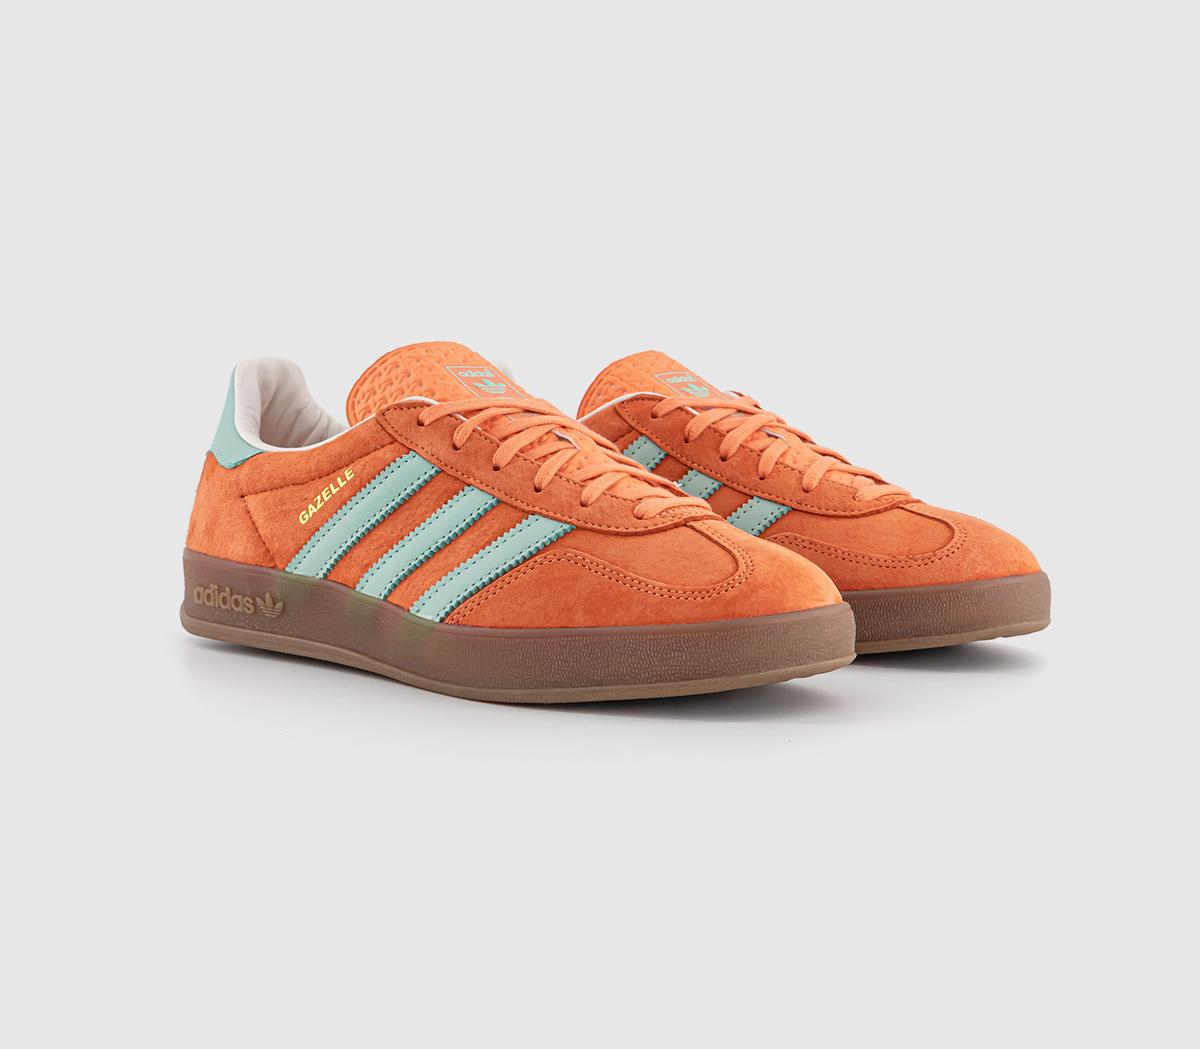 Adidas Gazelle Indoor Trainers Easy Orange Clear Mint Gum Red, 7